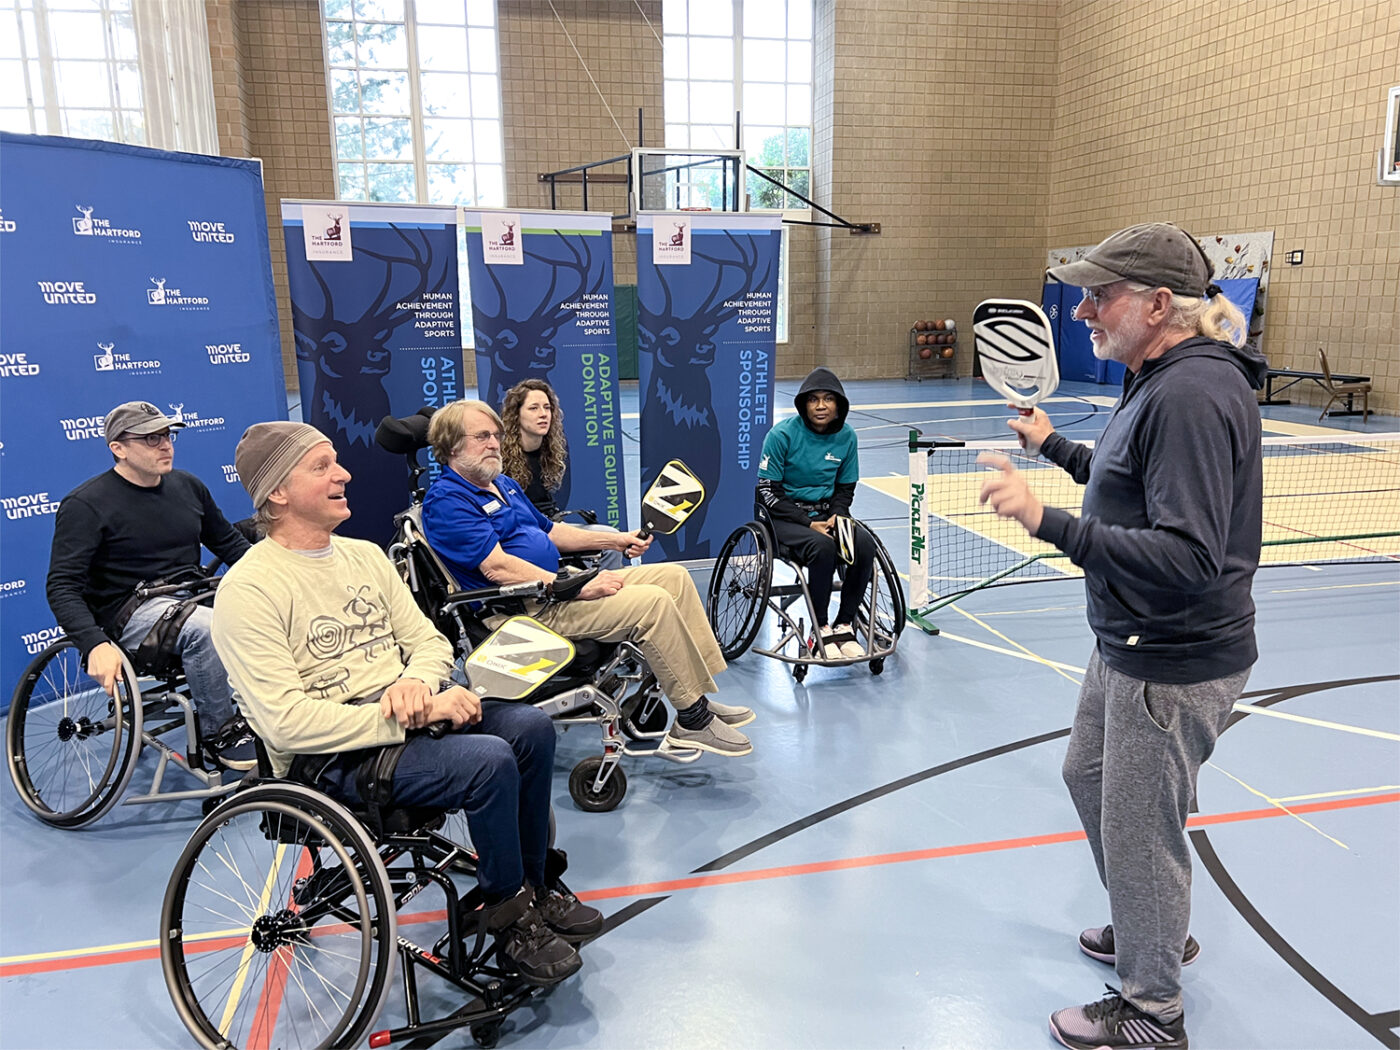 Pickleball gallery - Activation event, instructor and group.